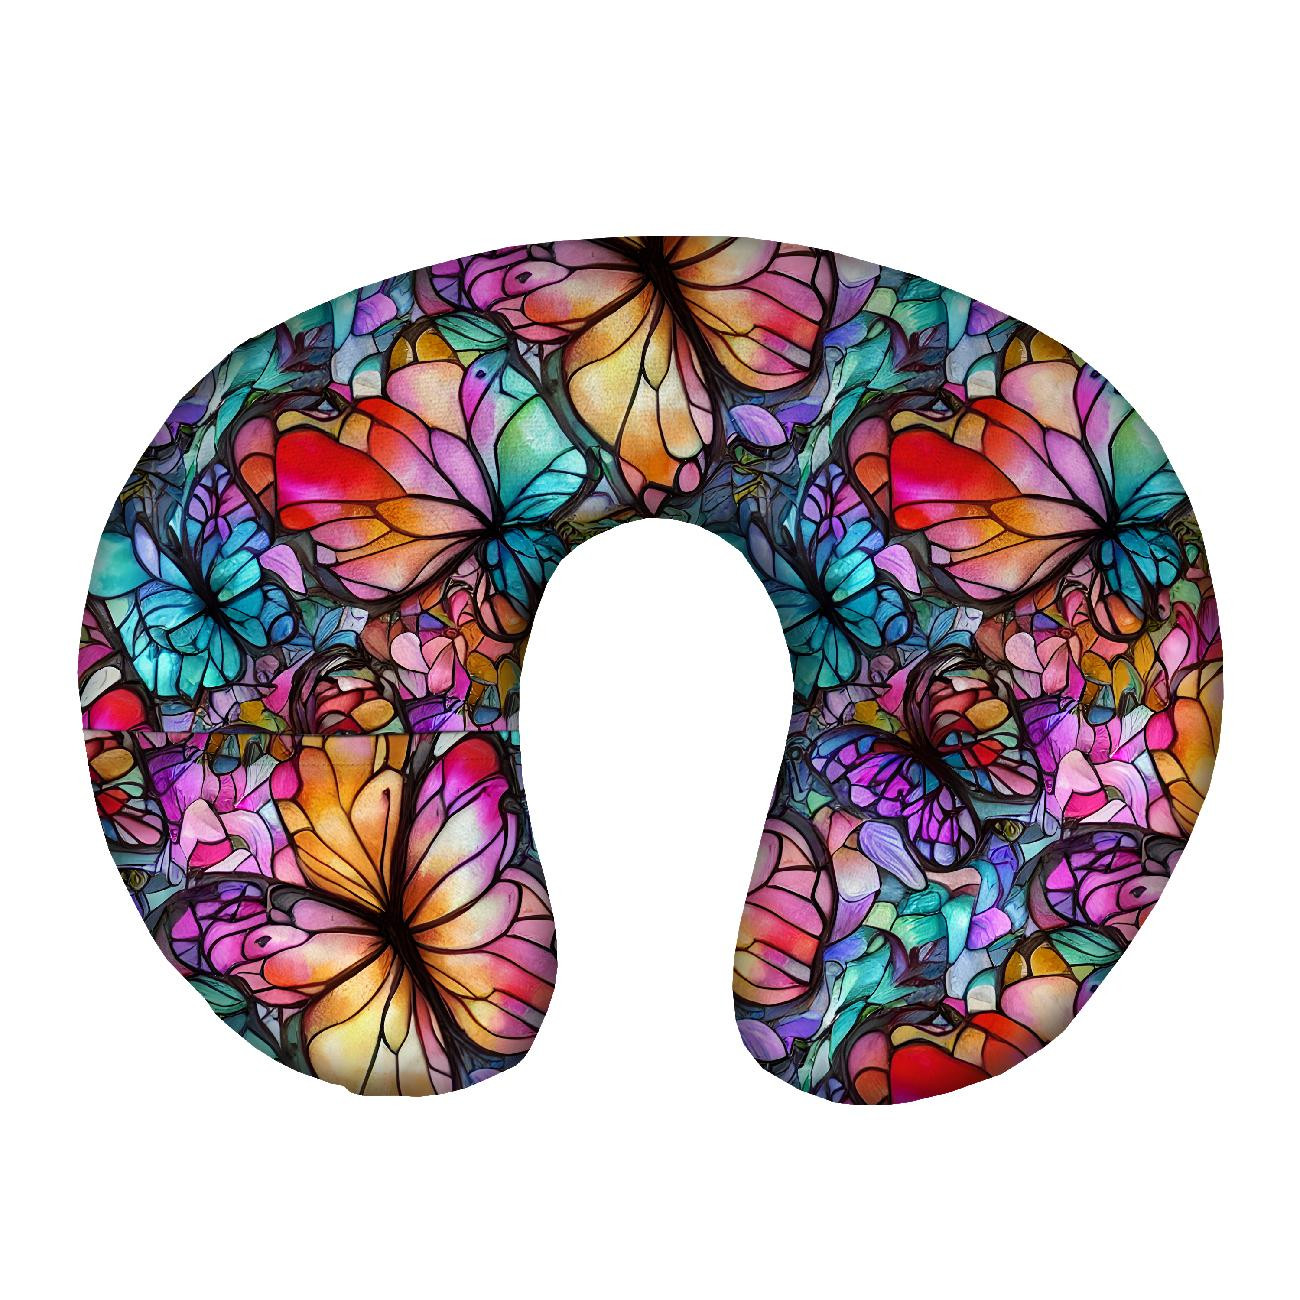 NECK PILLOW - BUTTERFLIES / STAINED GLASS - sewing set